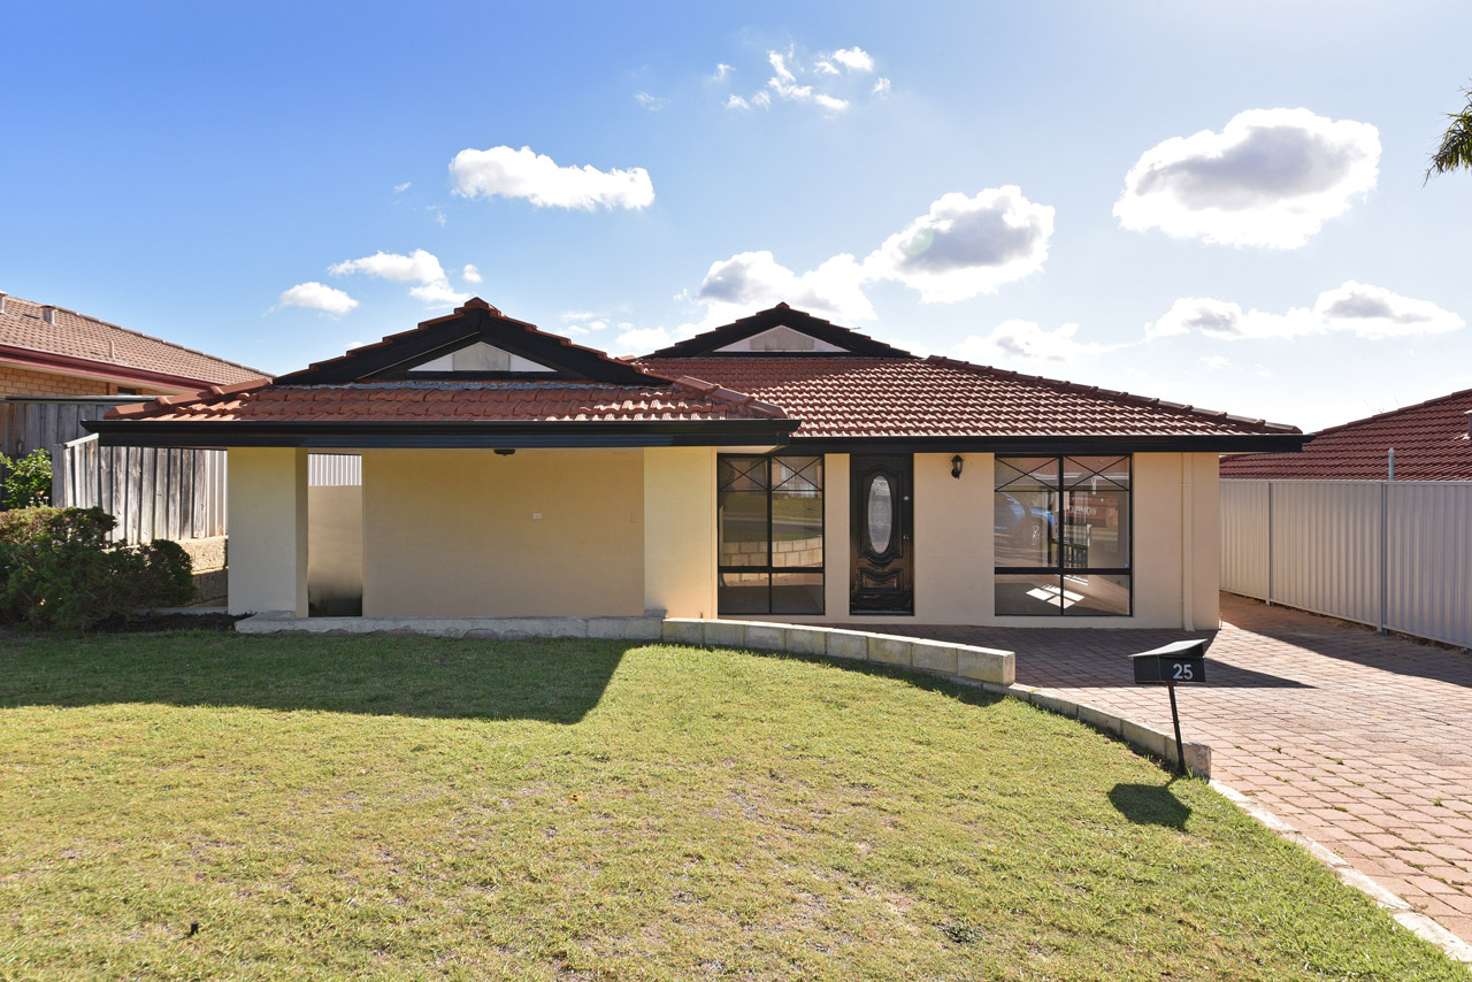 Main view of Homely house listing, 25 Renshaw Boulevard, Clarkson WA 6030